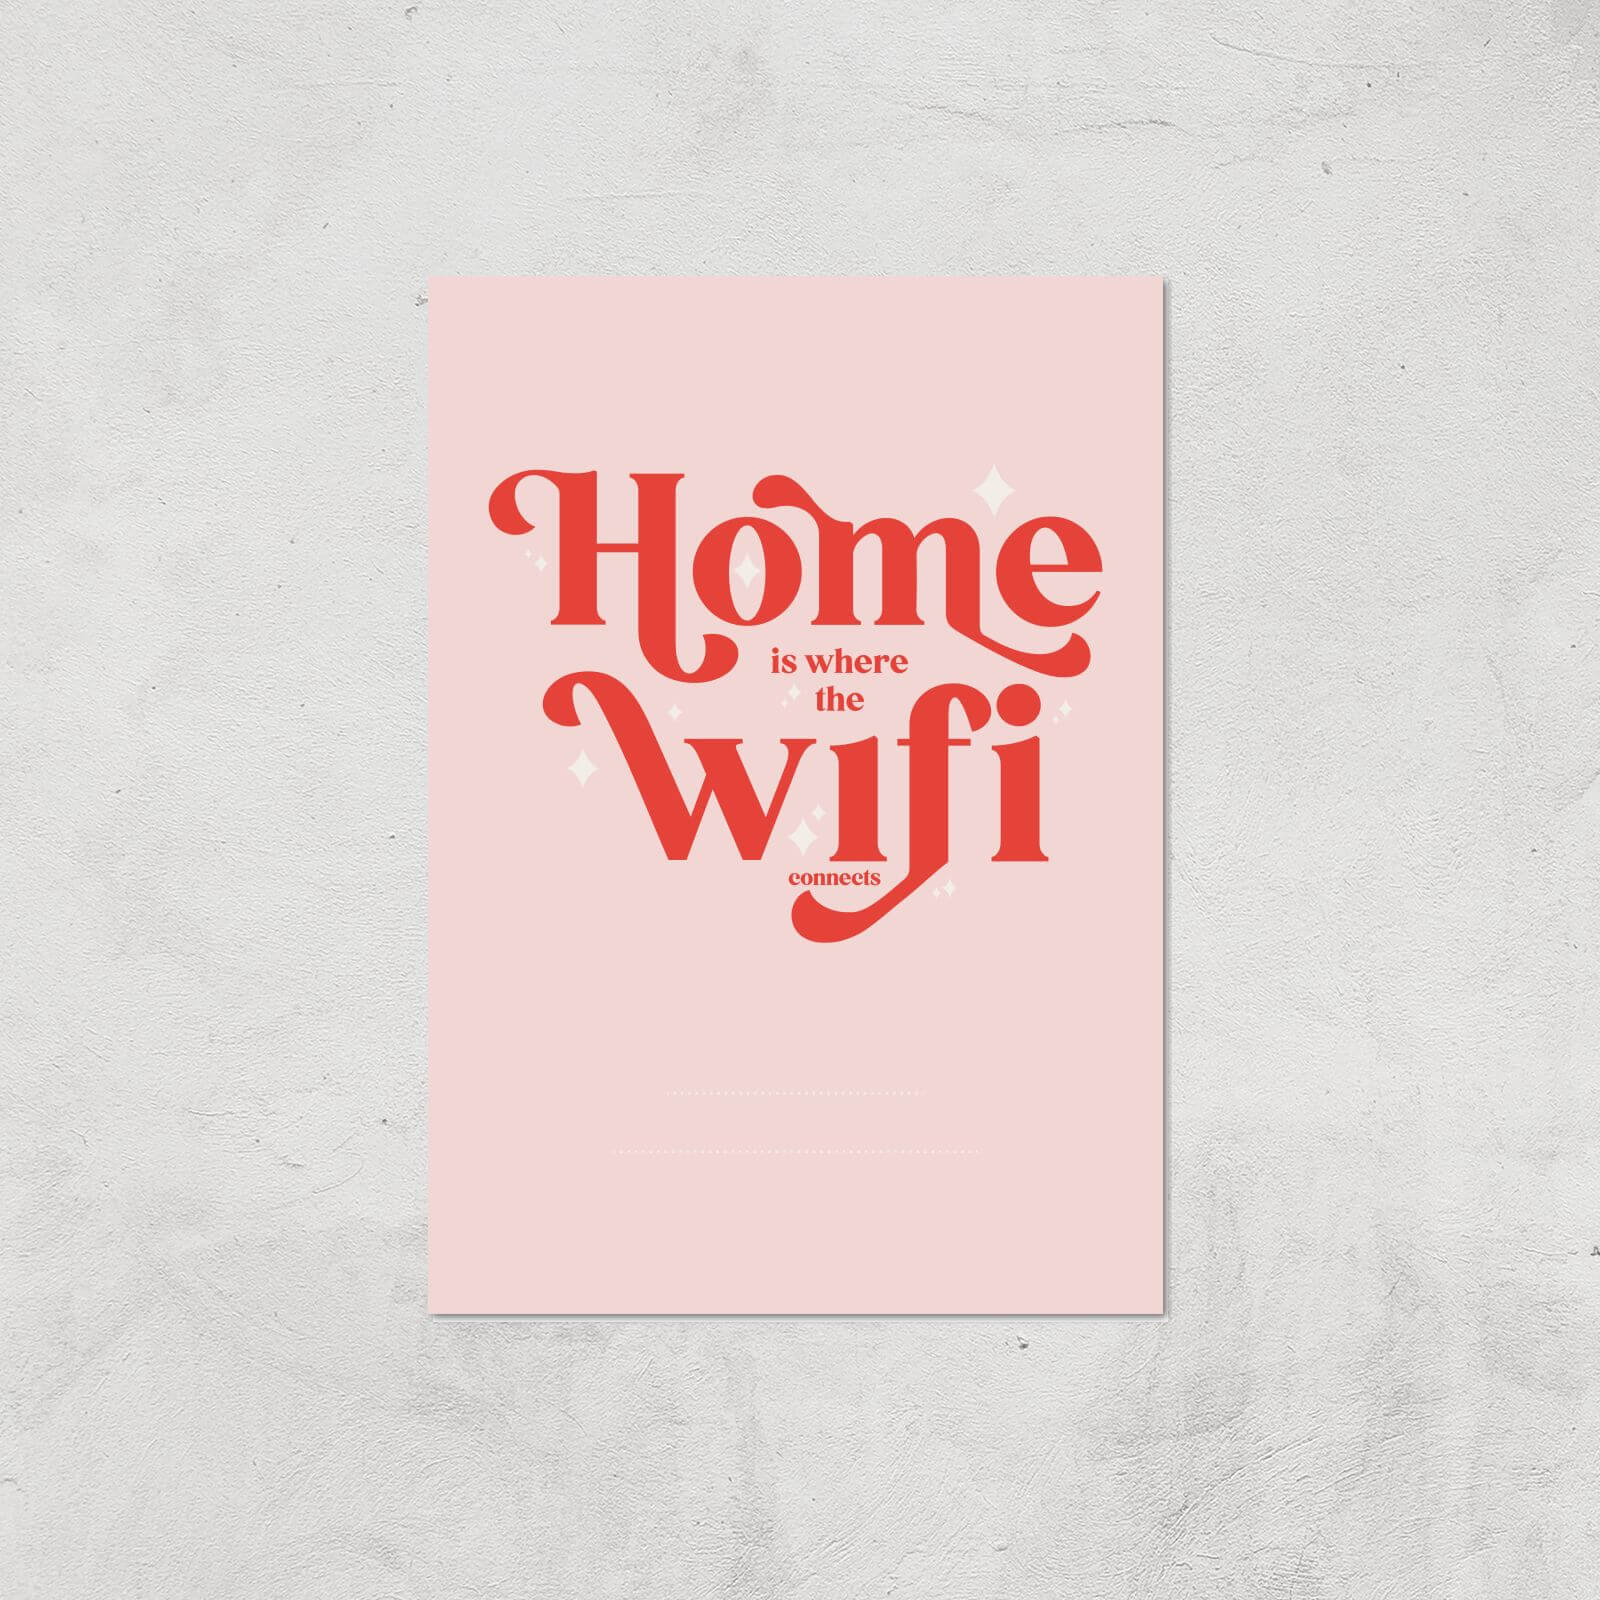 Hermione Chantal Light Home Is Where The Wifi Is Giclee Art Print - A2 - Print Only